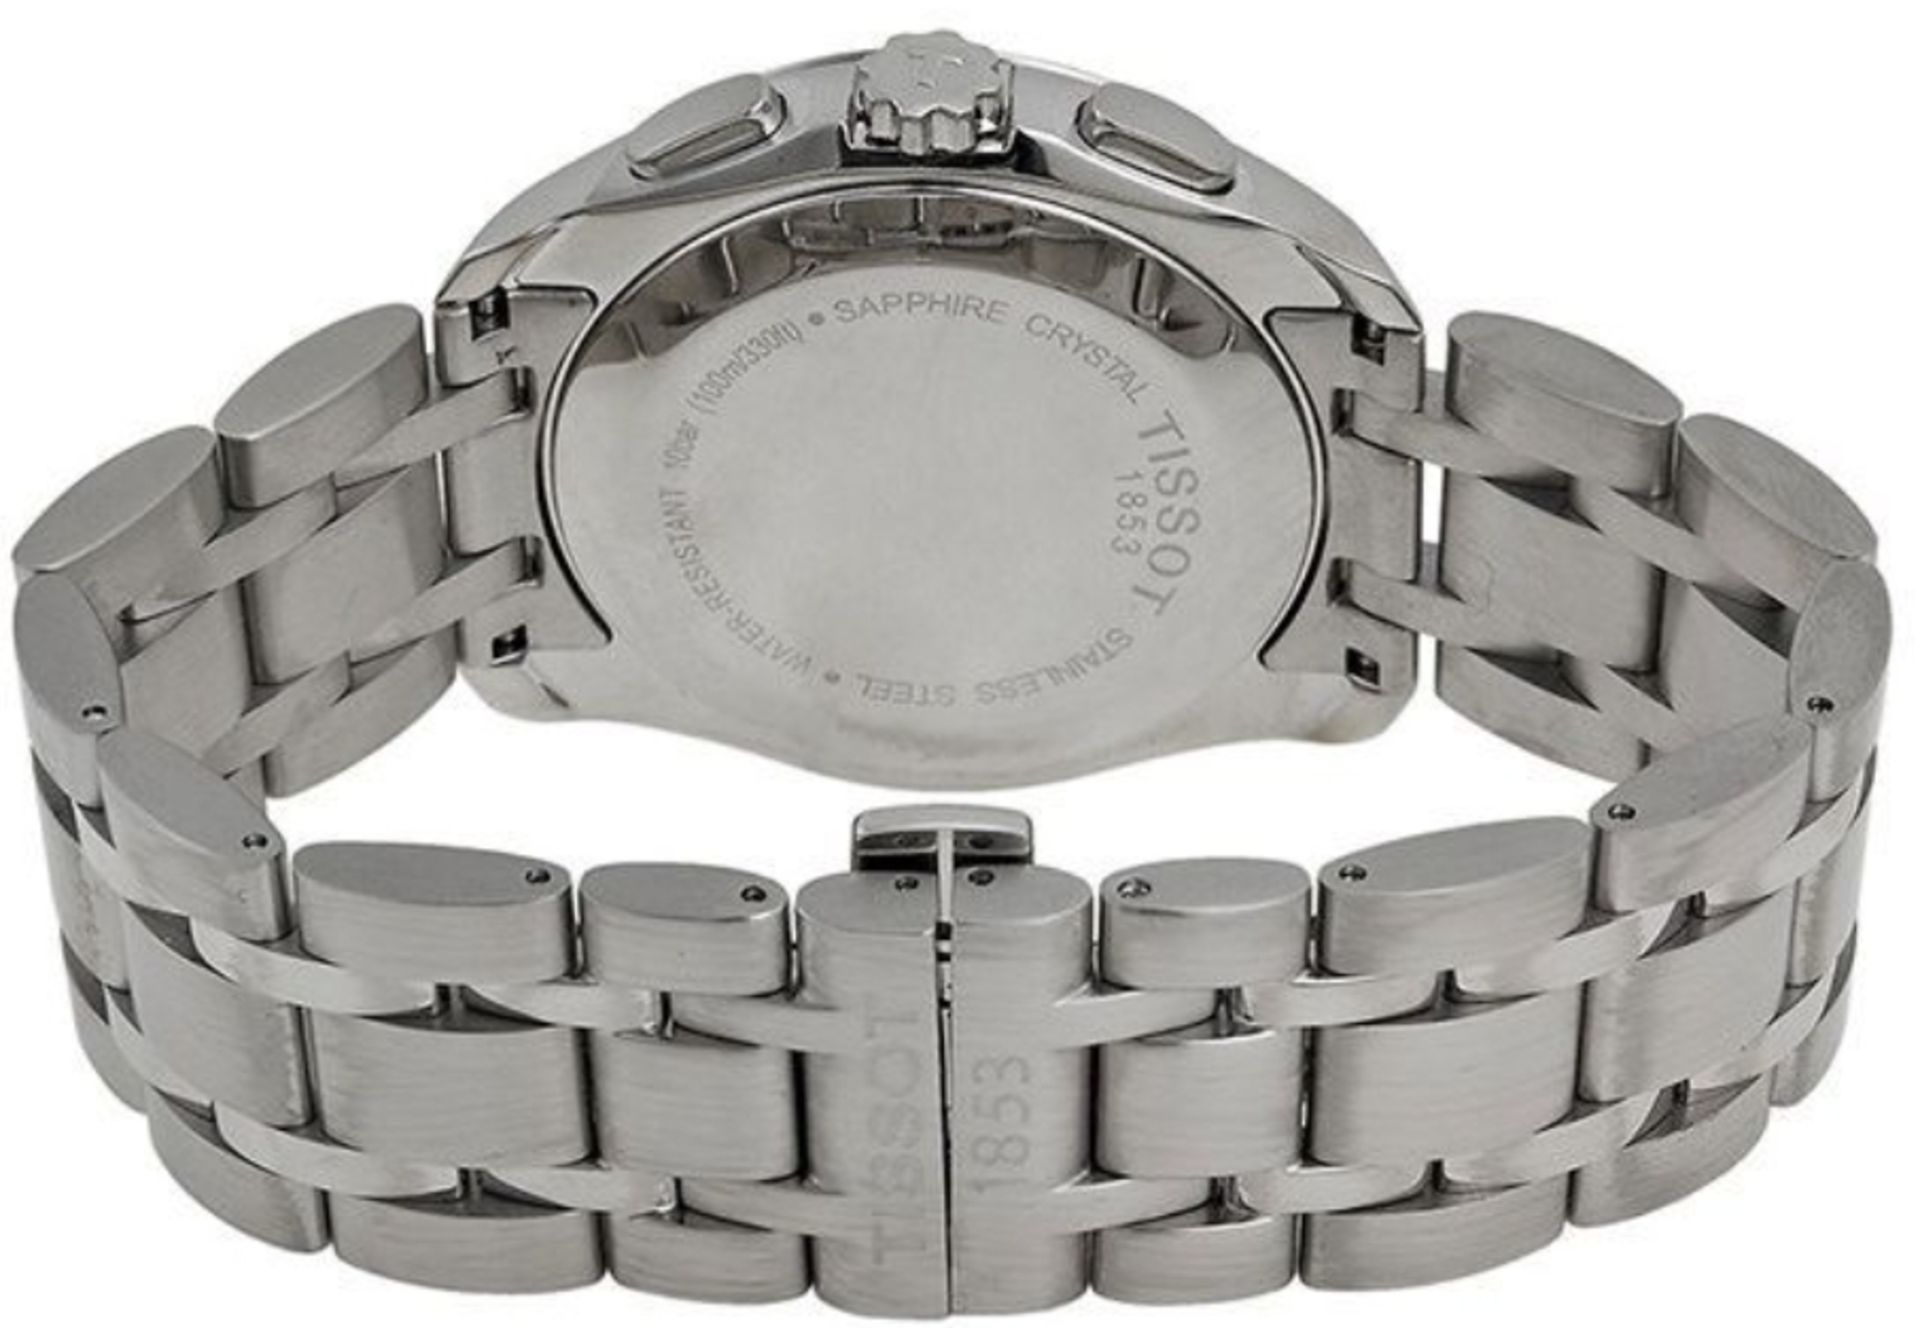 Tissot T035.617.11.031.00 Couturier Stainless Steel Men's Watch - Image 3 of 4